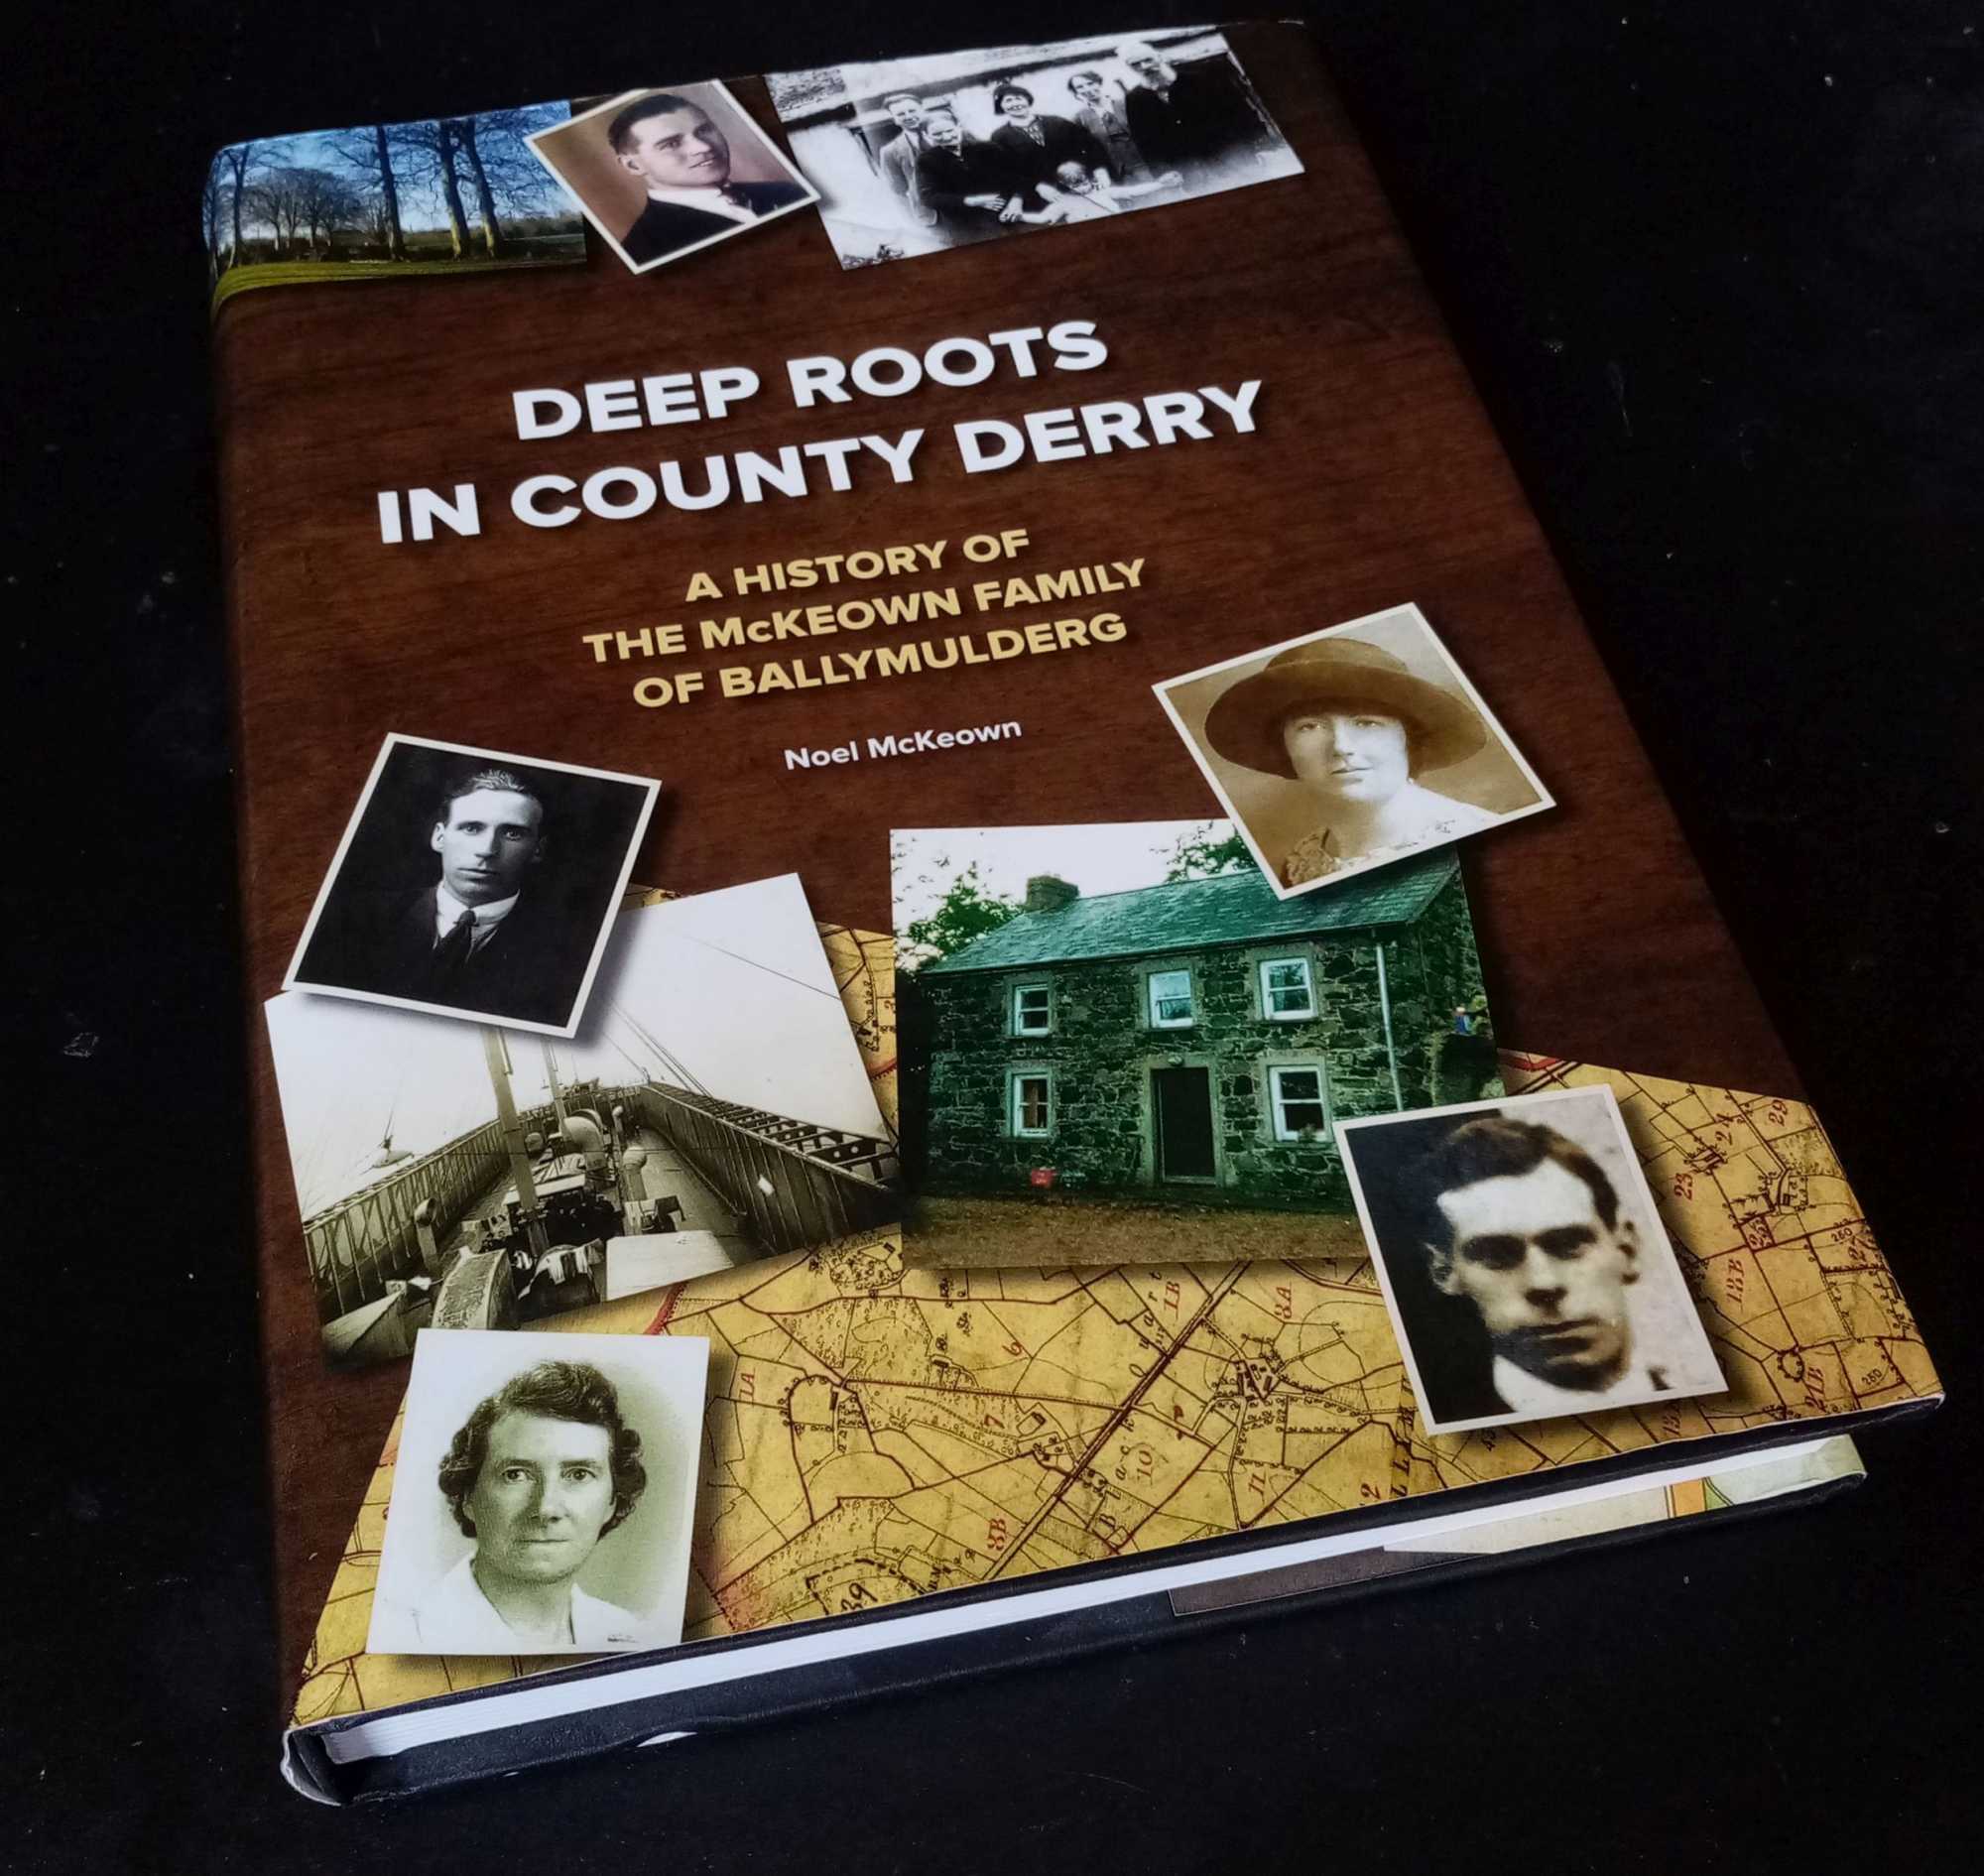 Noel McKeown - Deep Roots in County Derry - A History of the McKeown Family of Ballymuldberg